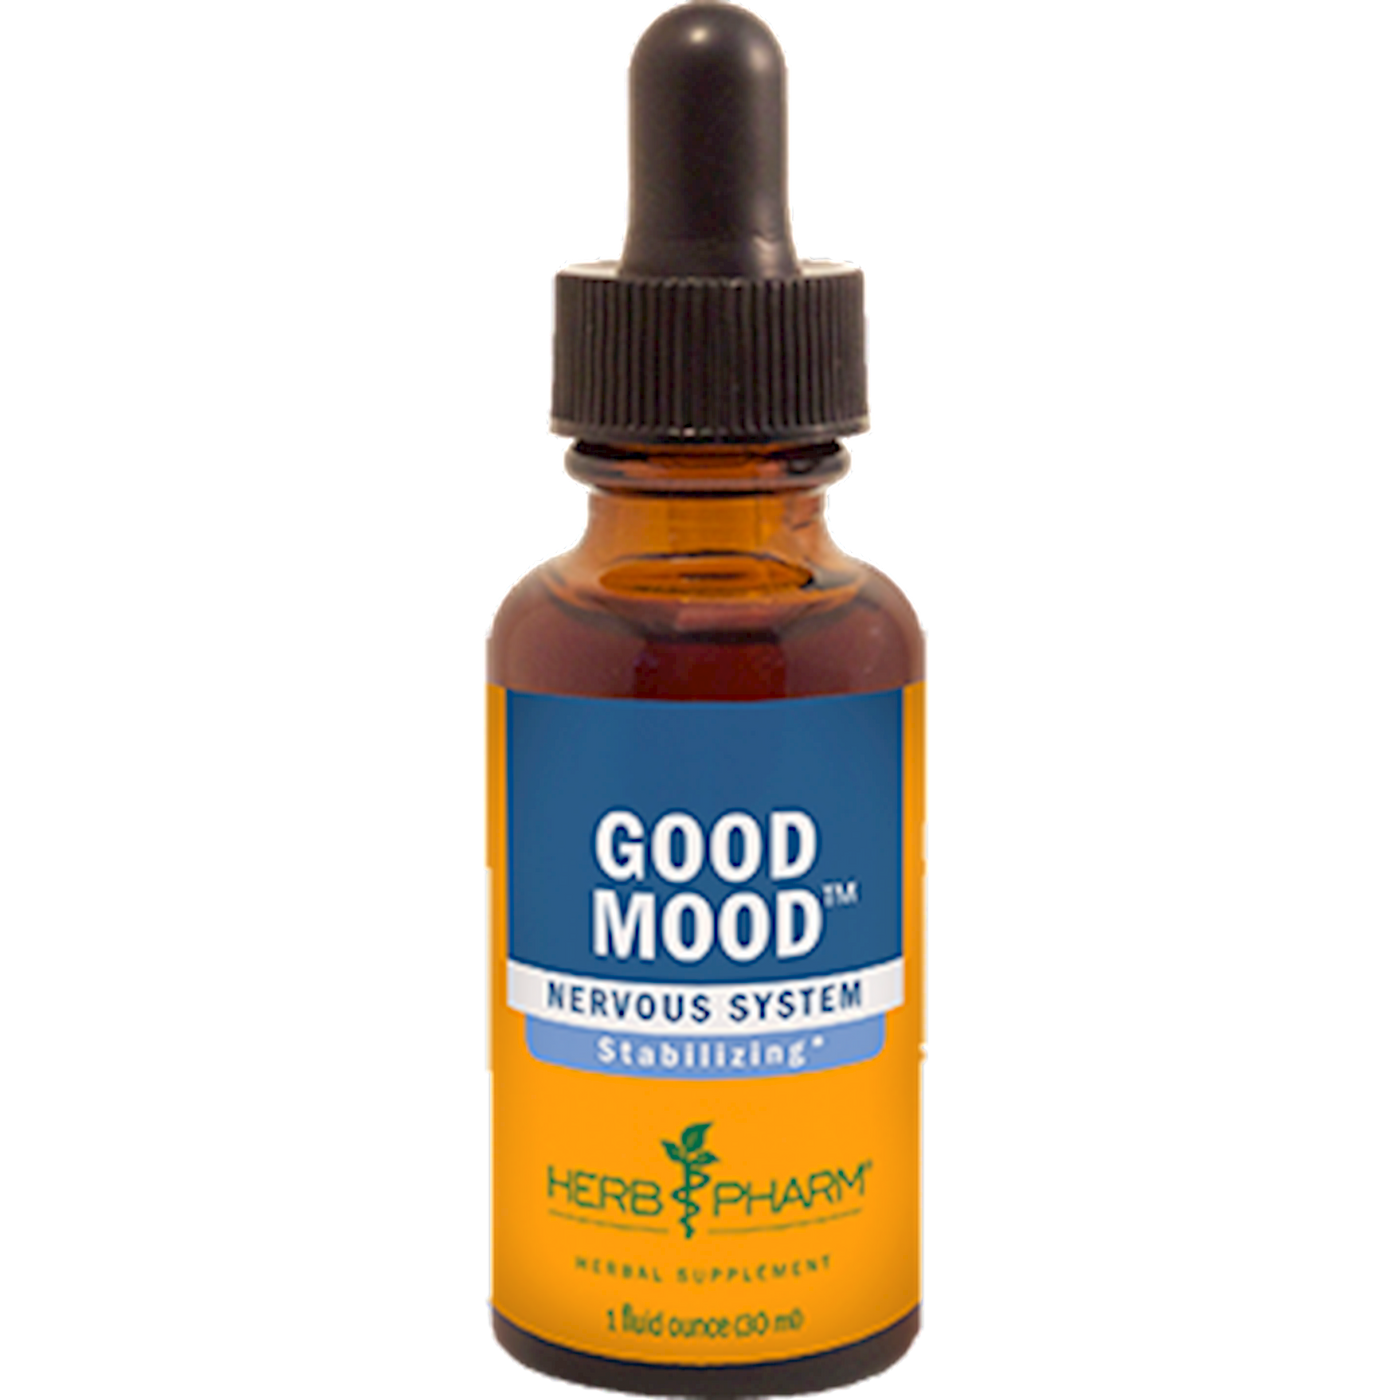 Good Mood Tonic Compound  Curated Wellness